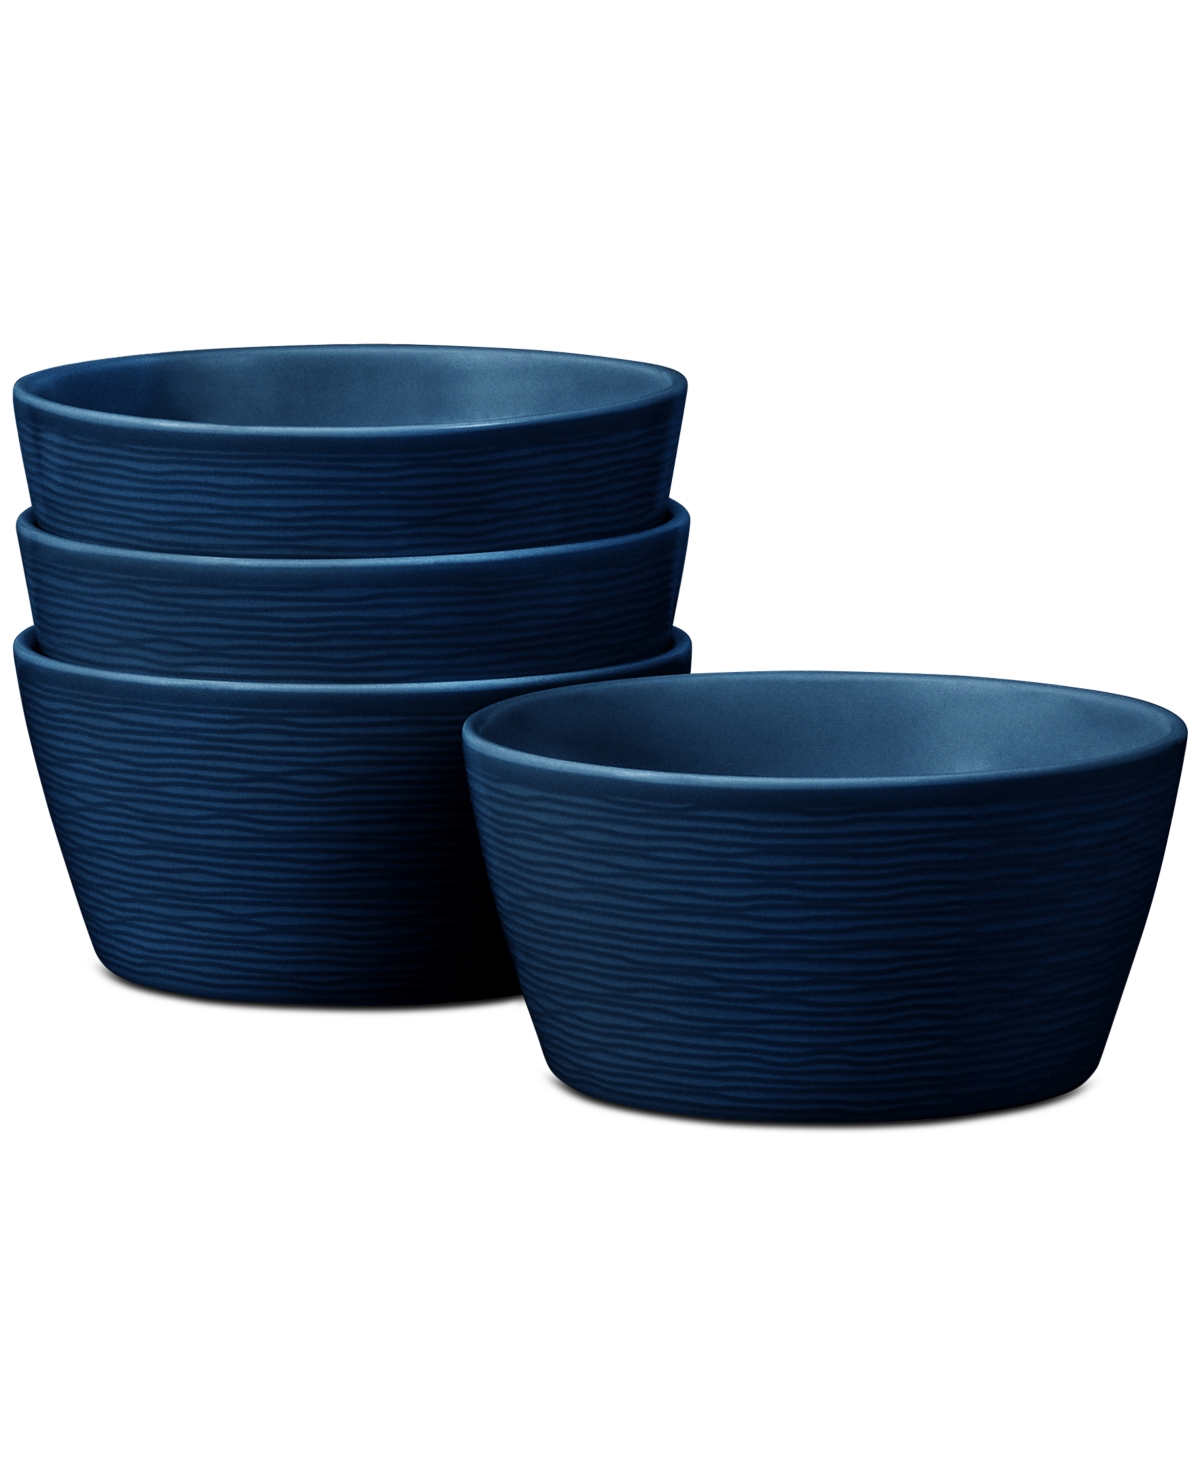 Swirl Cereal Bowls, Set of 4 - Navy